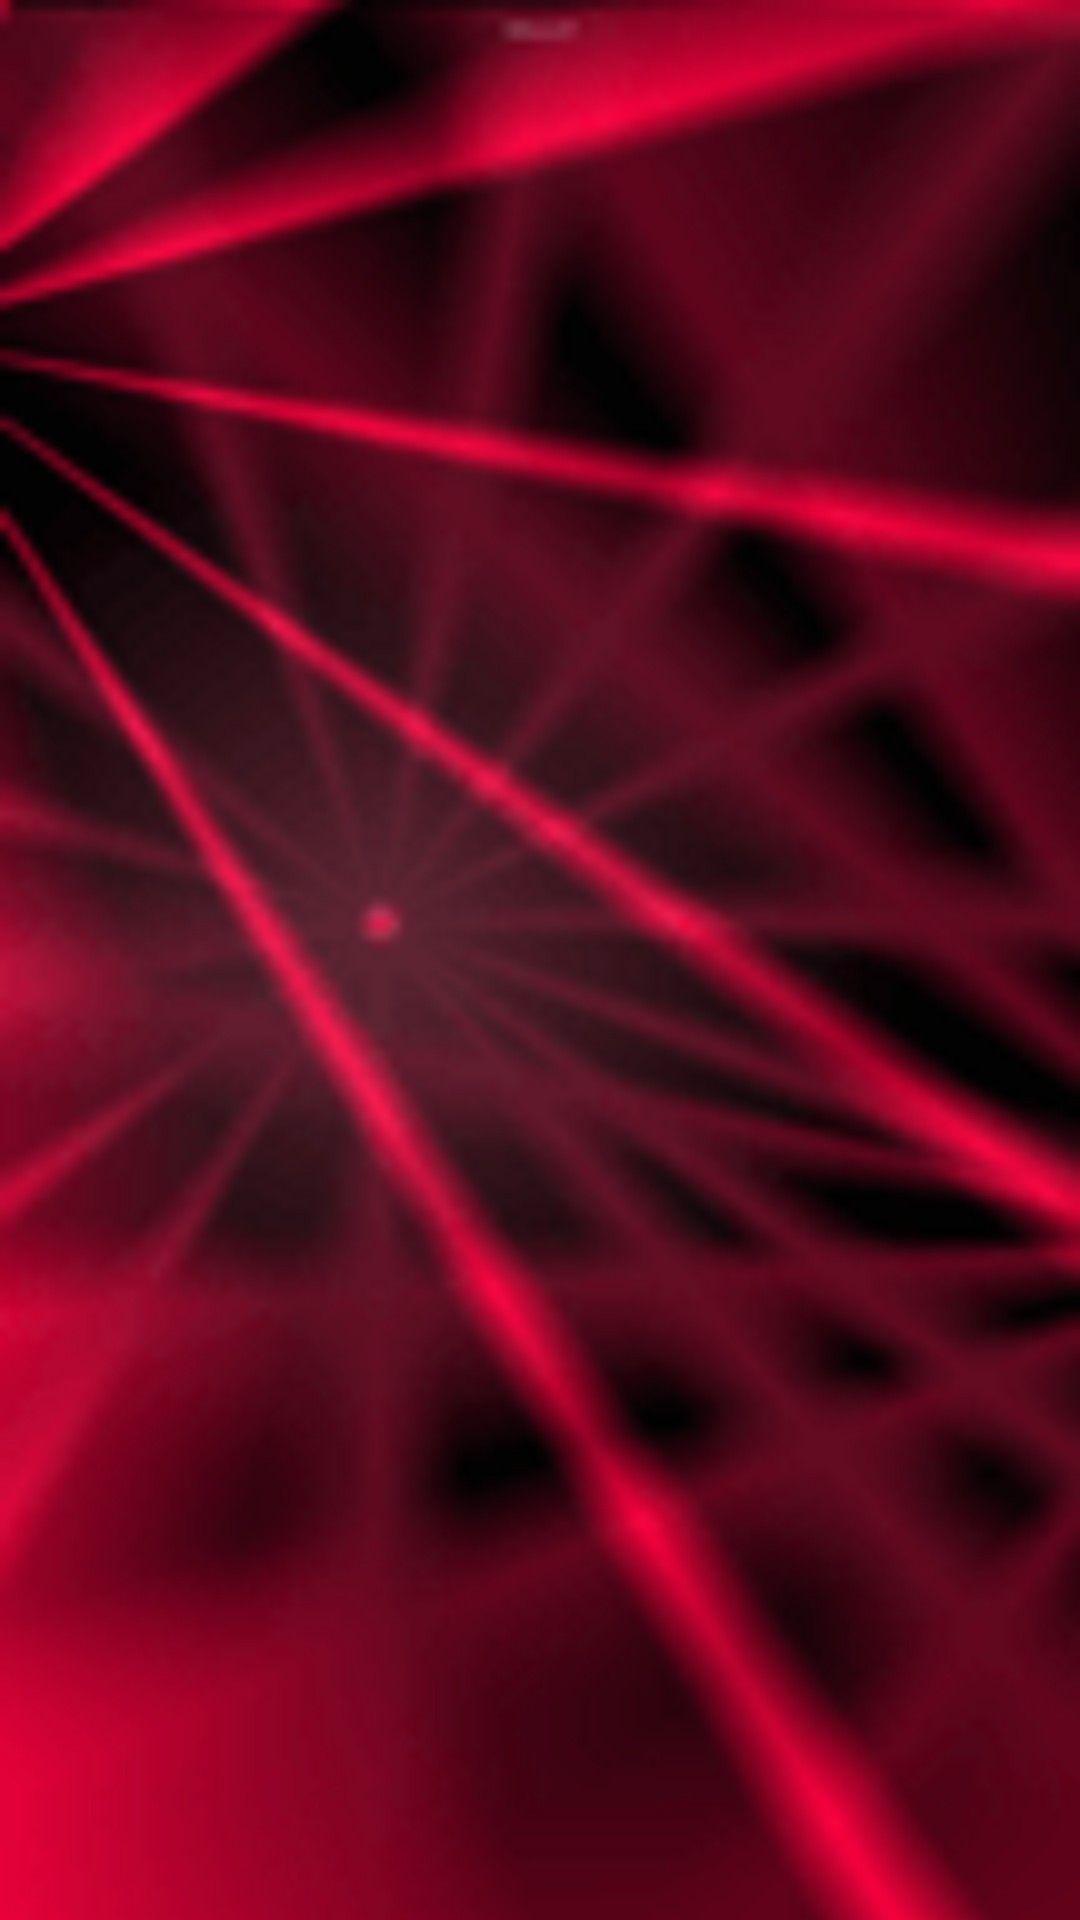 light red laser 1080 x 1920 Wallpaper available for free download